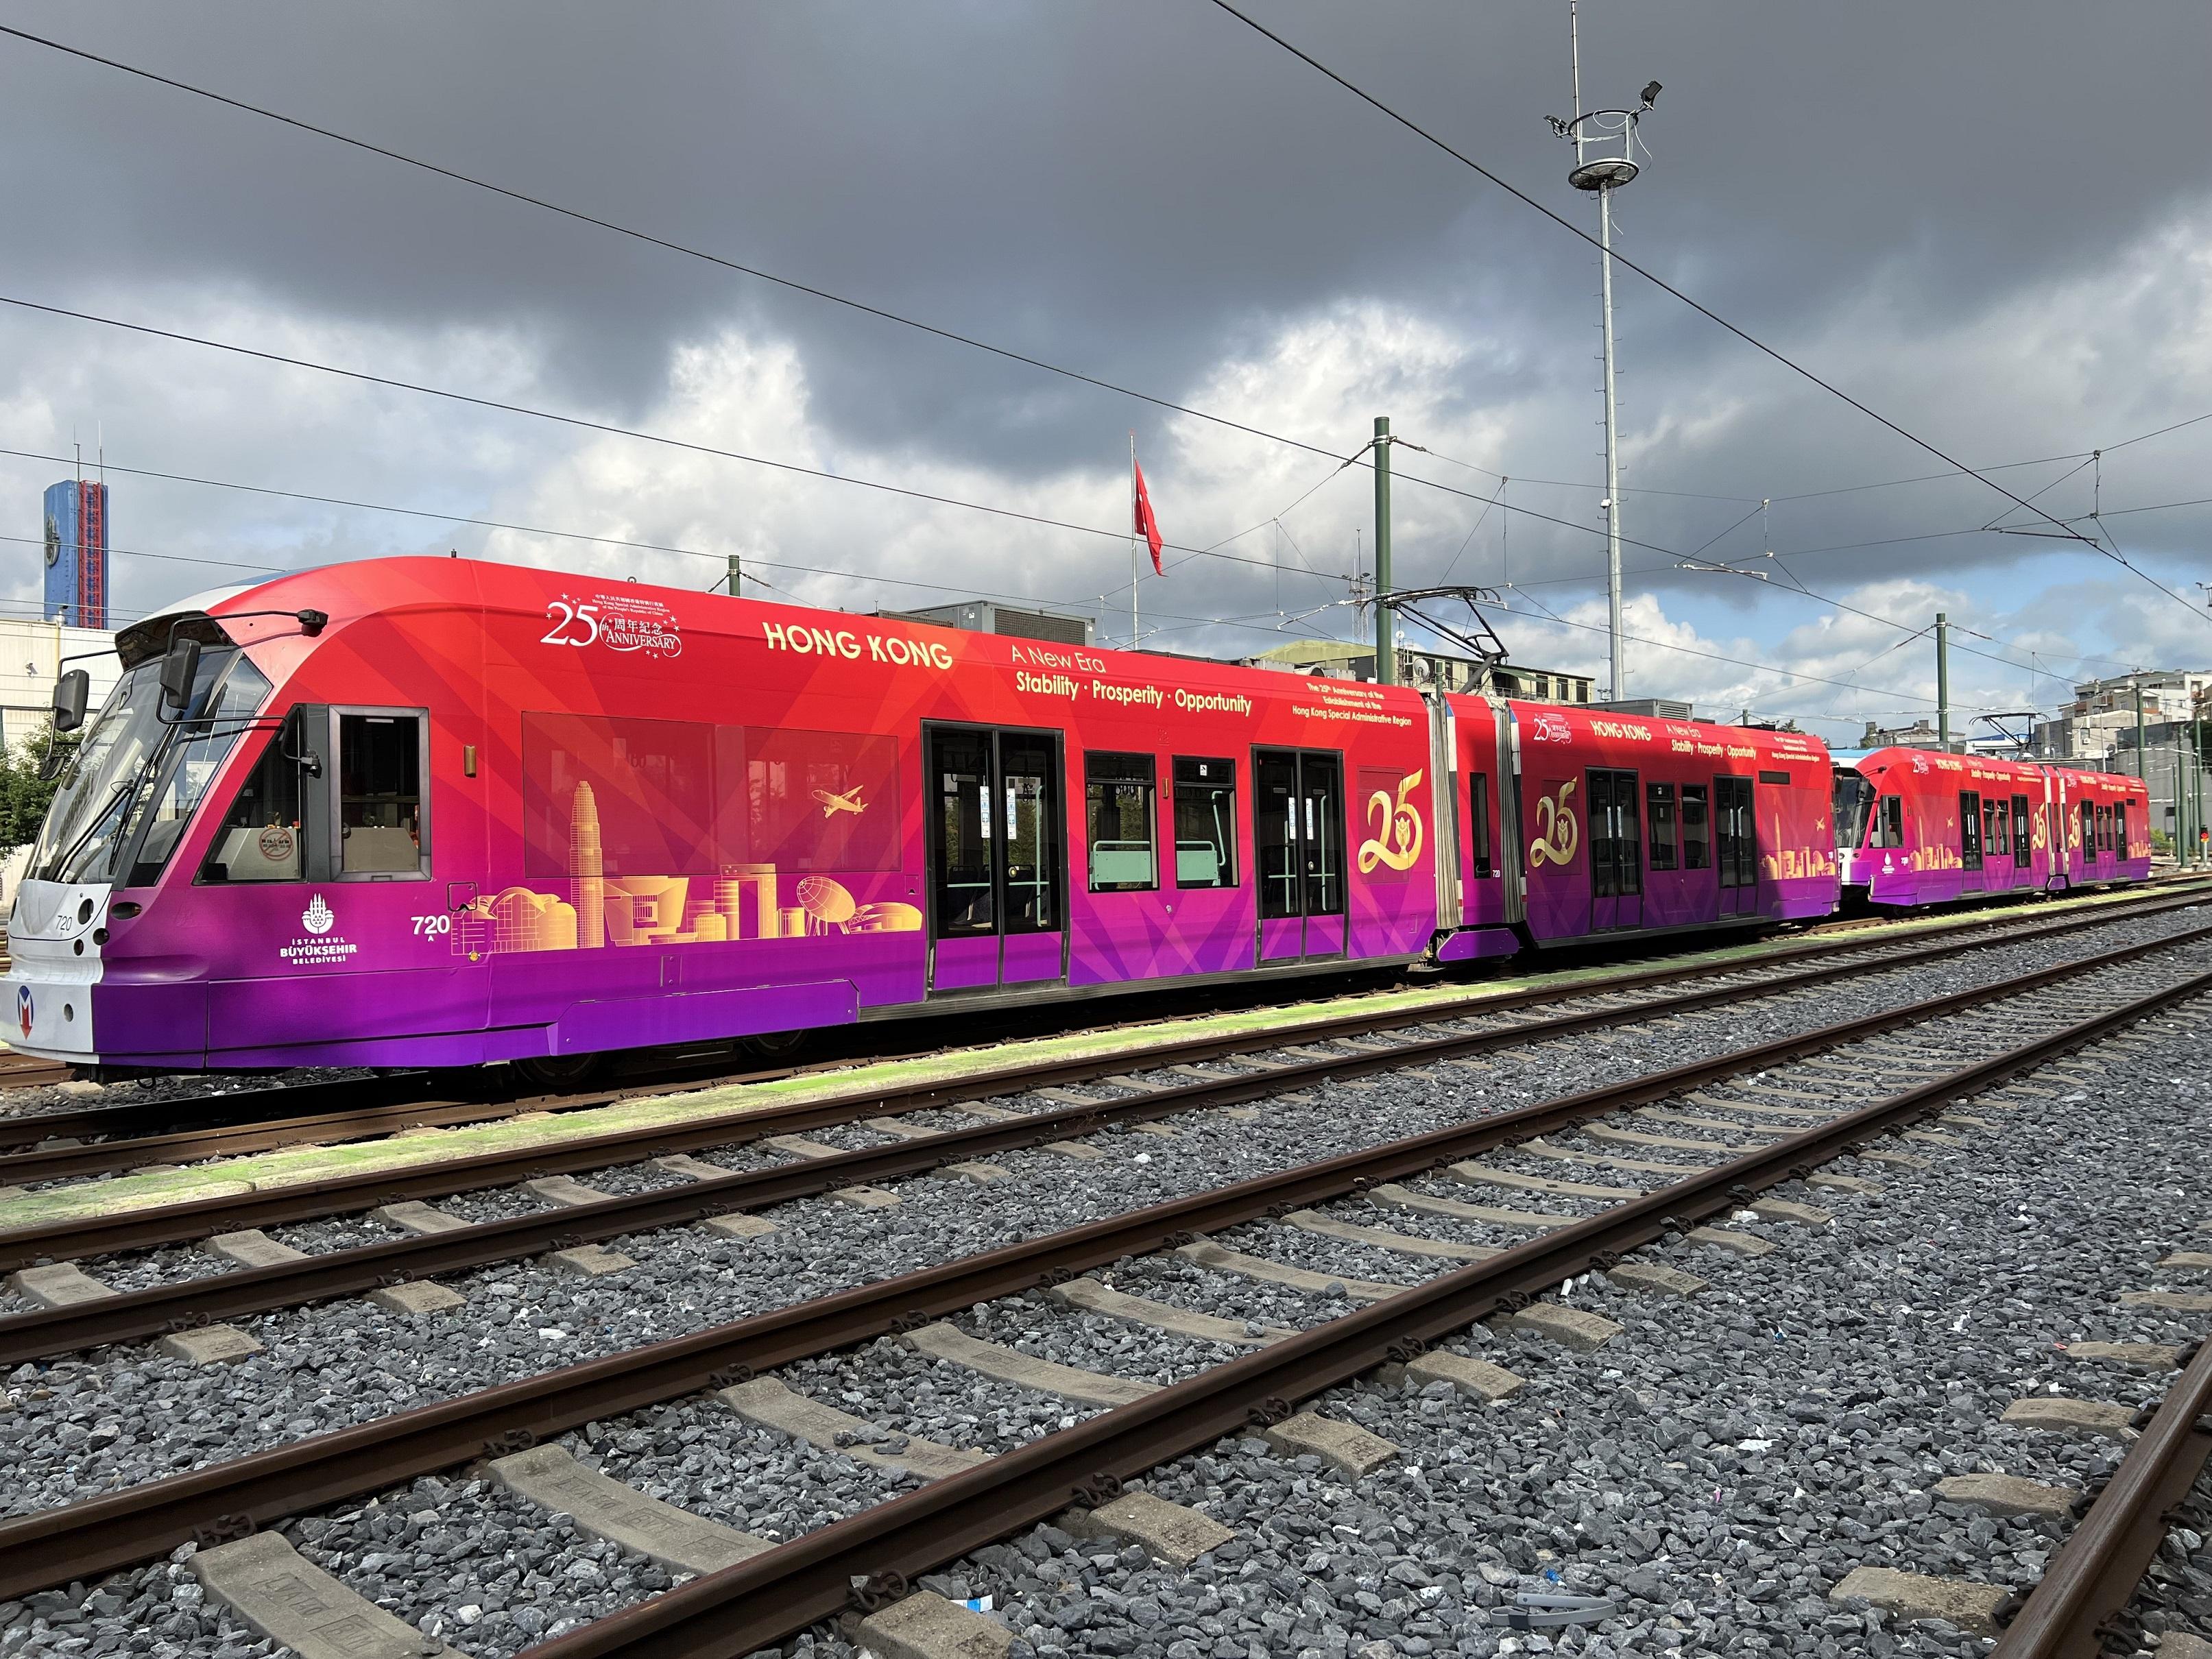 At the initiative of the Hong Kong Economic and Trade Office in Brussels, a tram decorated with the colourful design for the 25th anniversary of the establishment of the Hong Kong Special Administrative Region is circulating in the streets of Istanbul, Turkey, between June and September 2022.